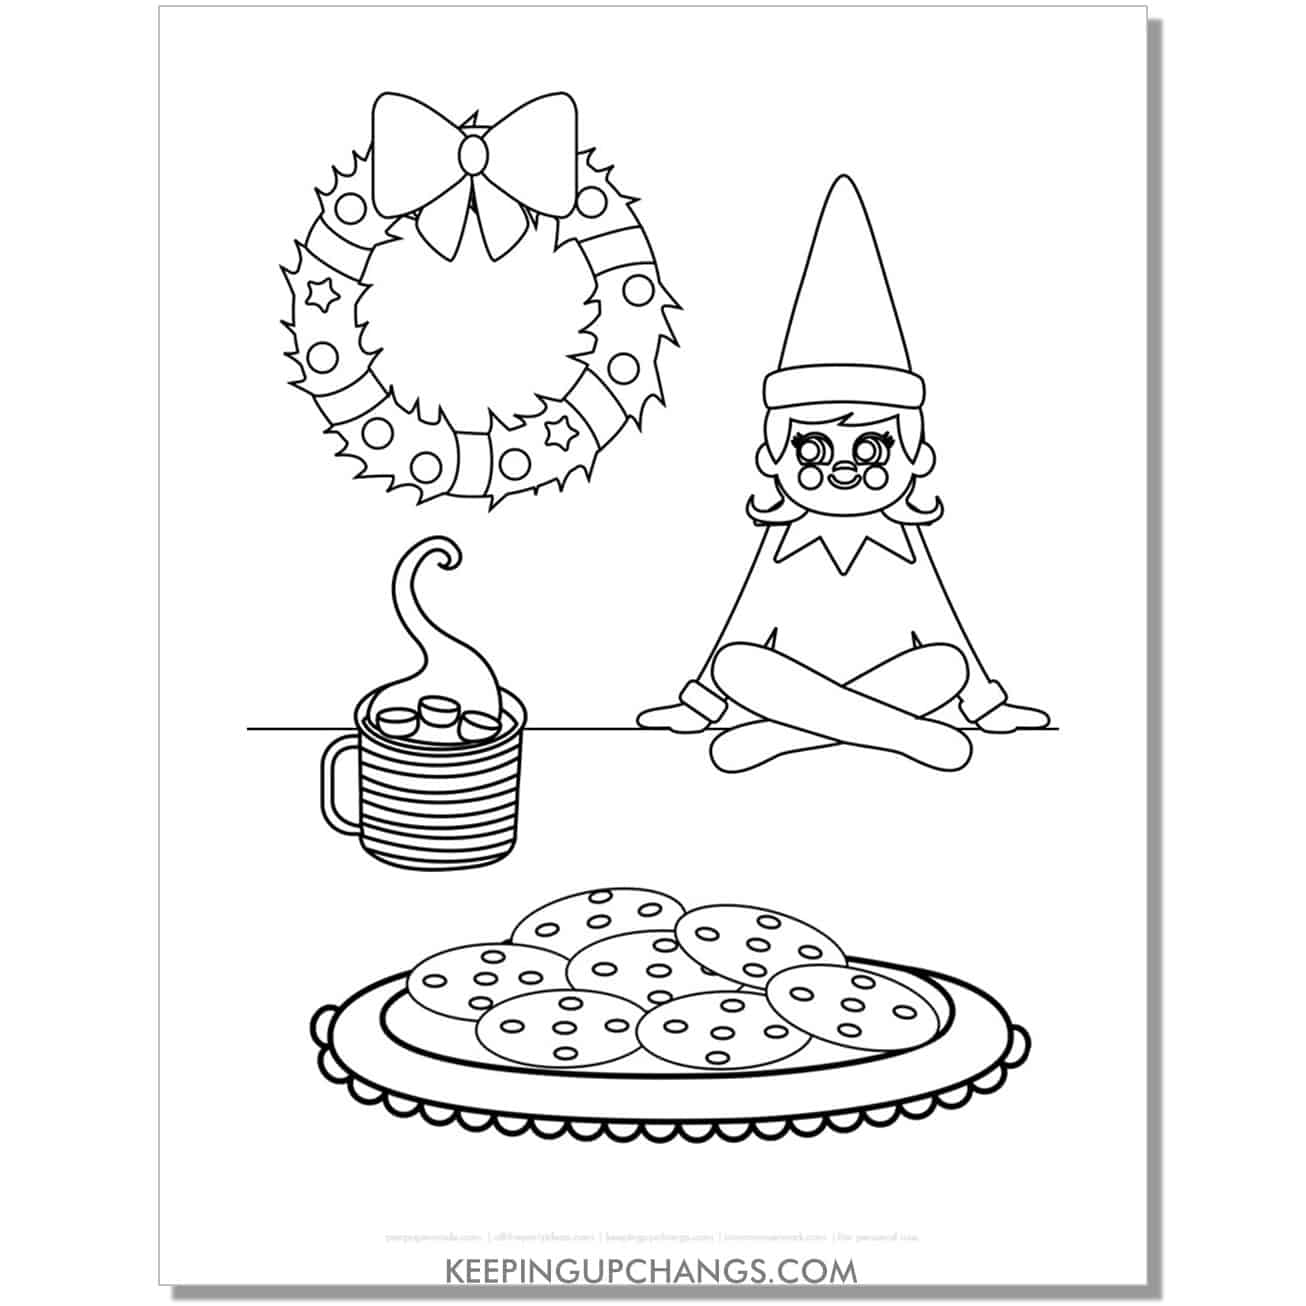 free elf on the shelf female girl with hot chocolate, cookies, wreath coloring page.